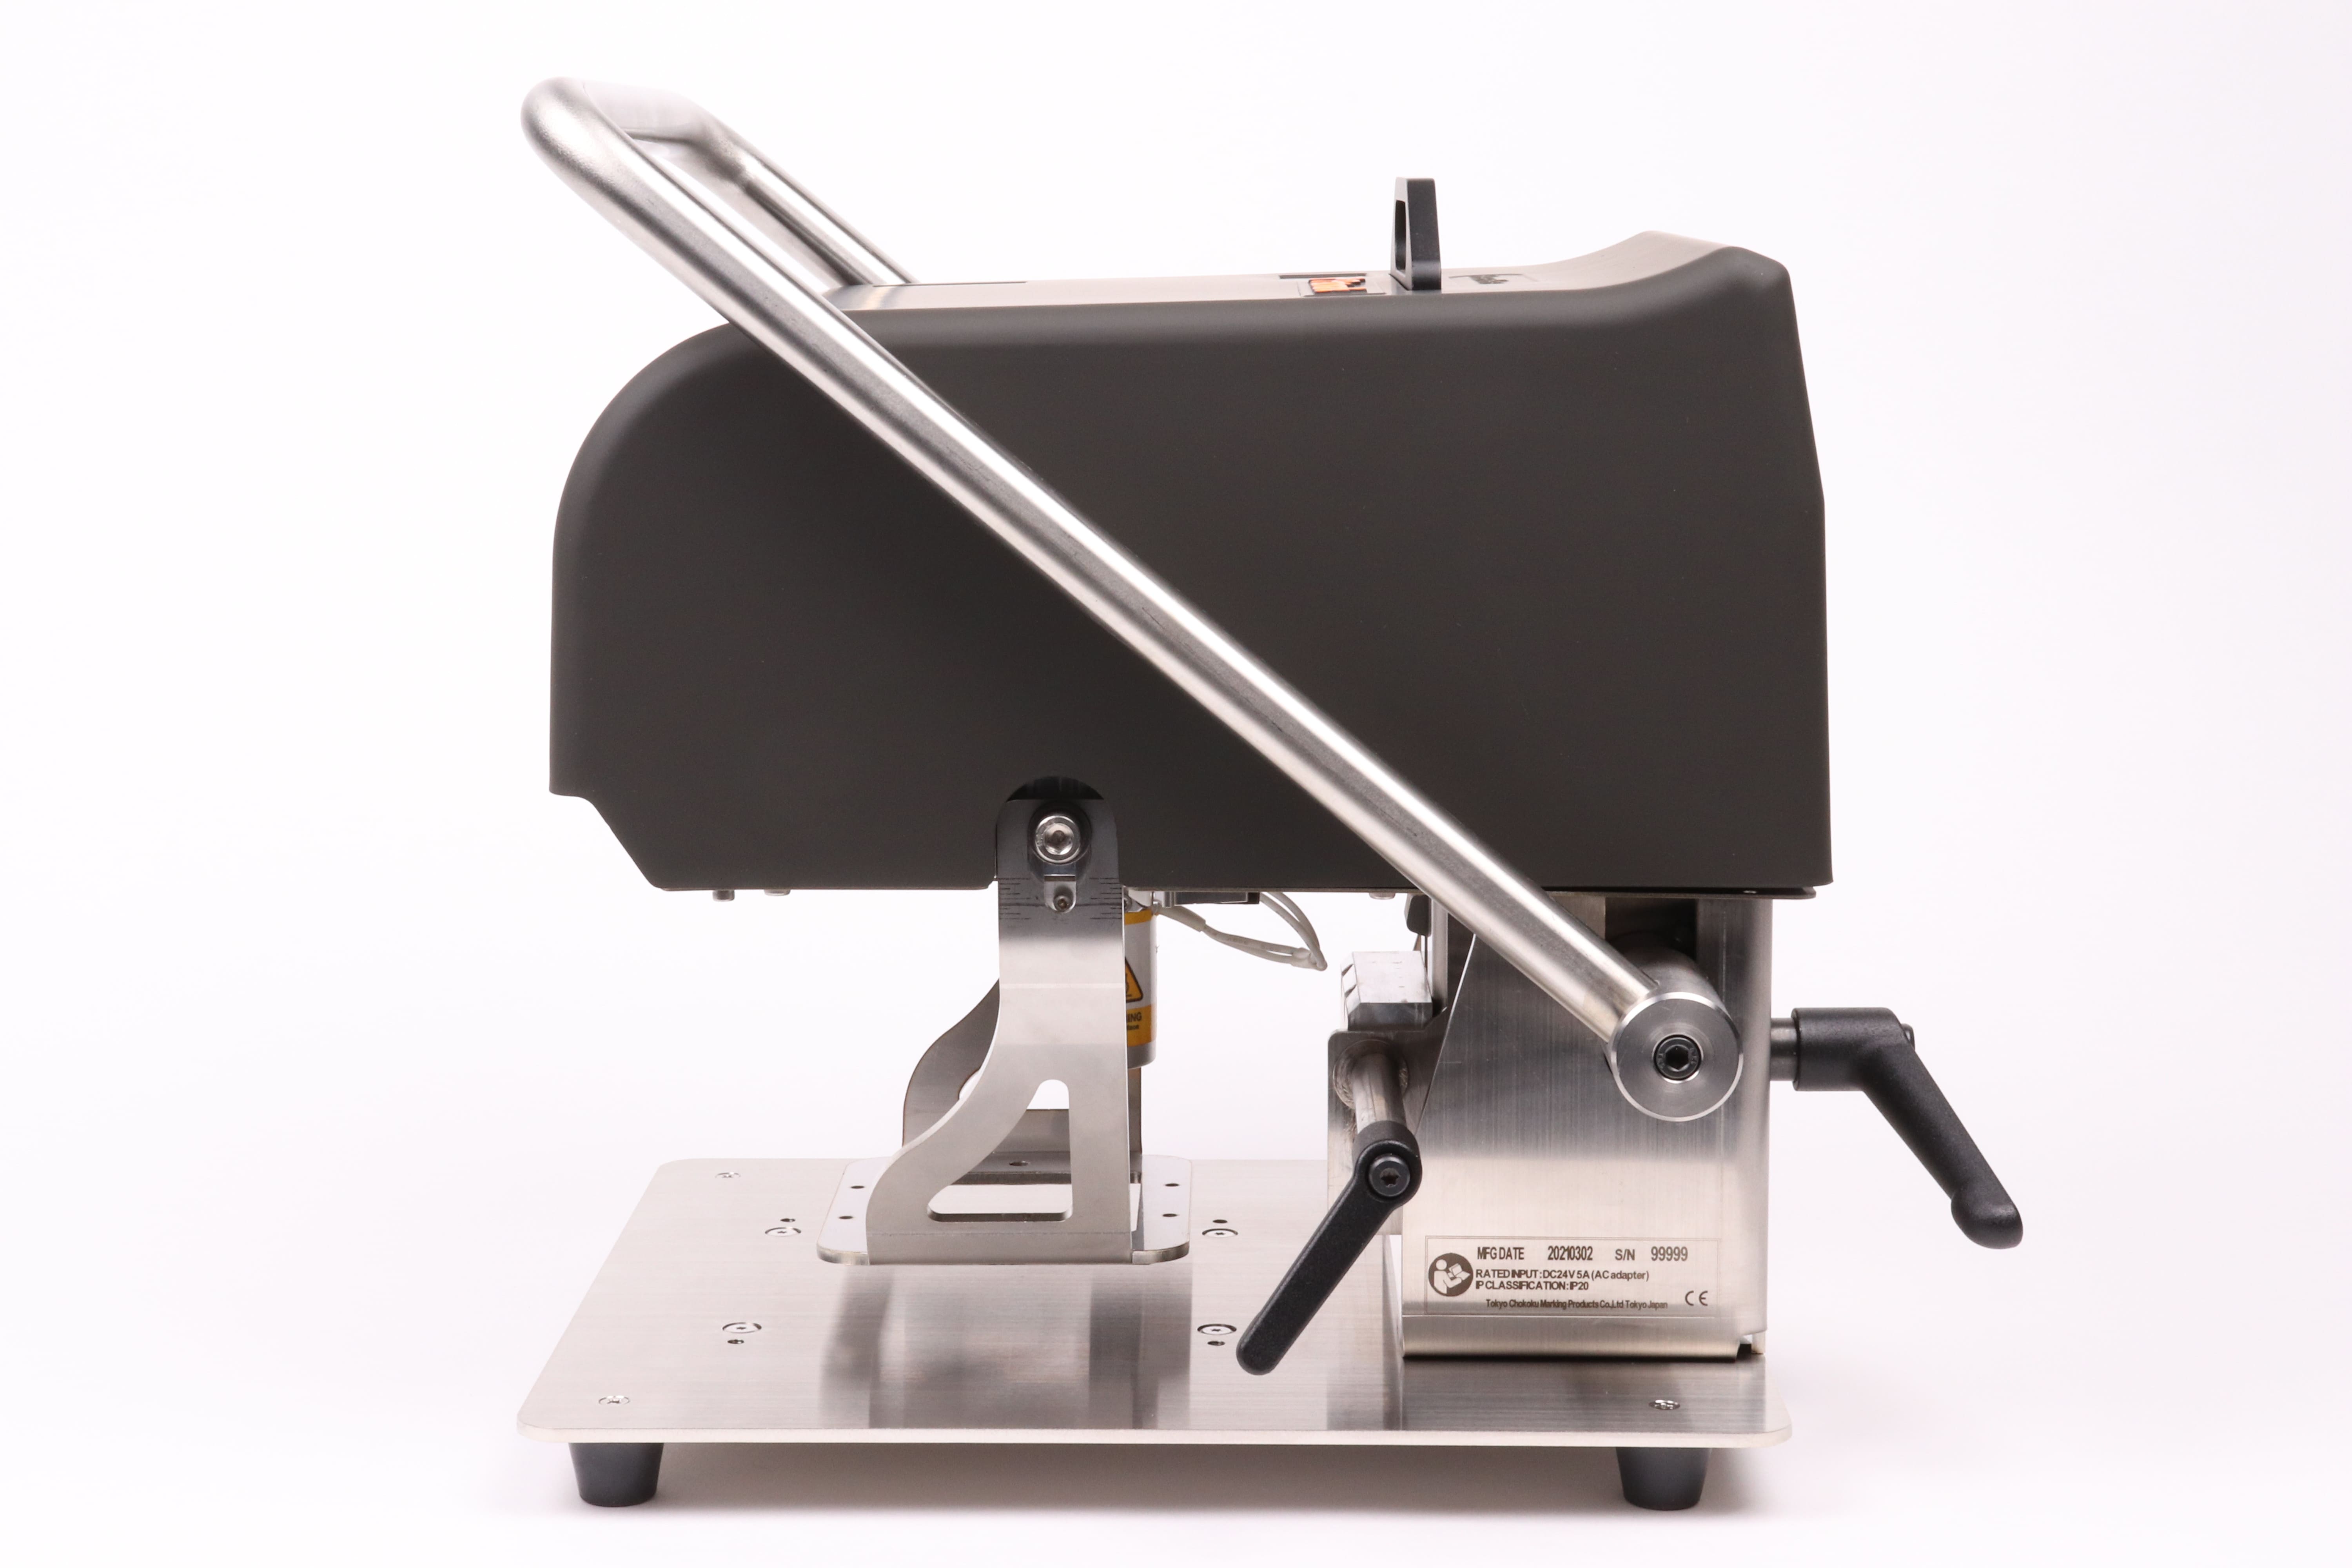 Image of the side view of the black Patmark-desktop unit from the Patmark series, with the fixation bar in the raised position.